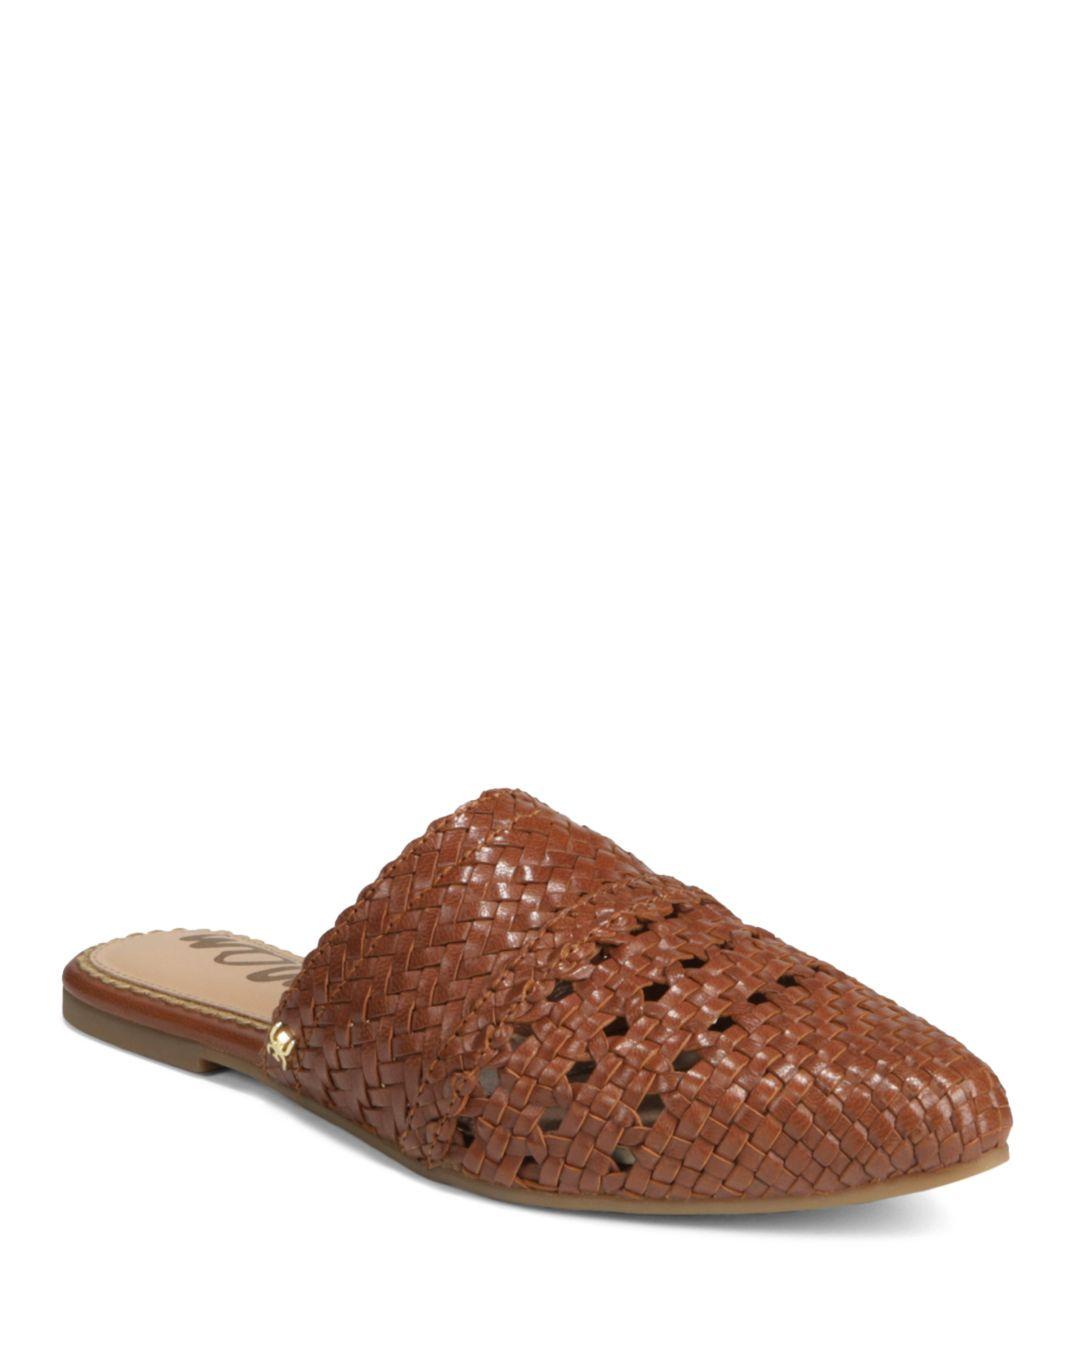 Sam Edelman Women's Natalya Woven Leather Mules in Brown - Save 58% - Lyst